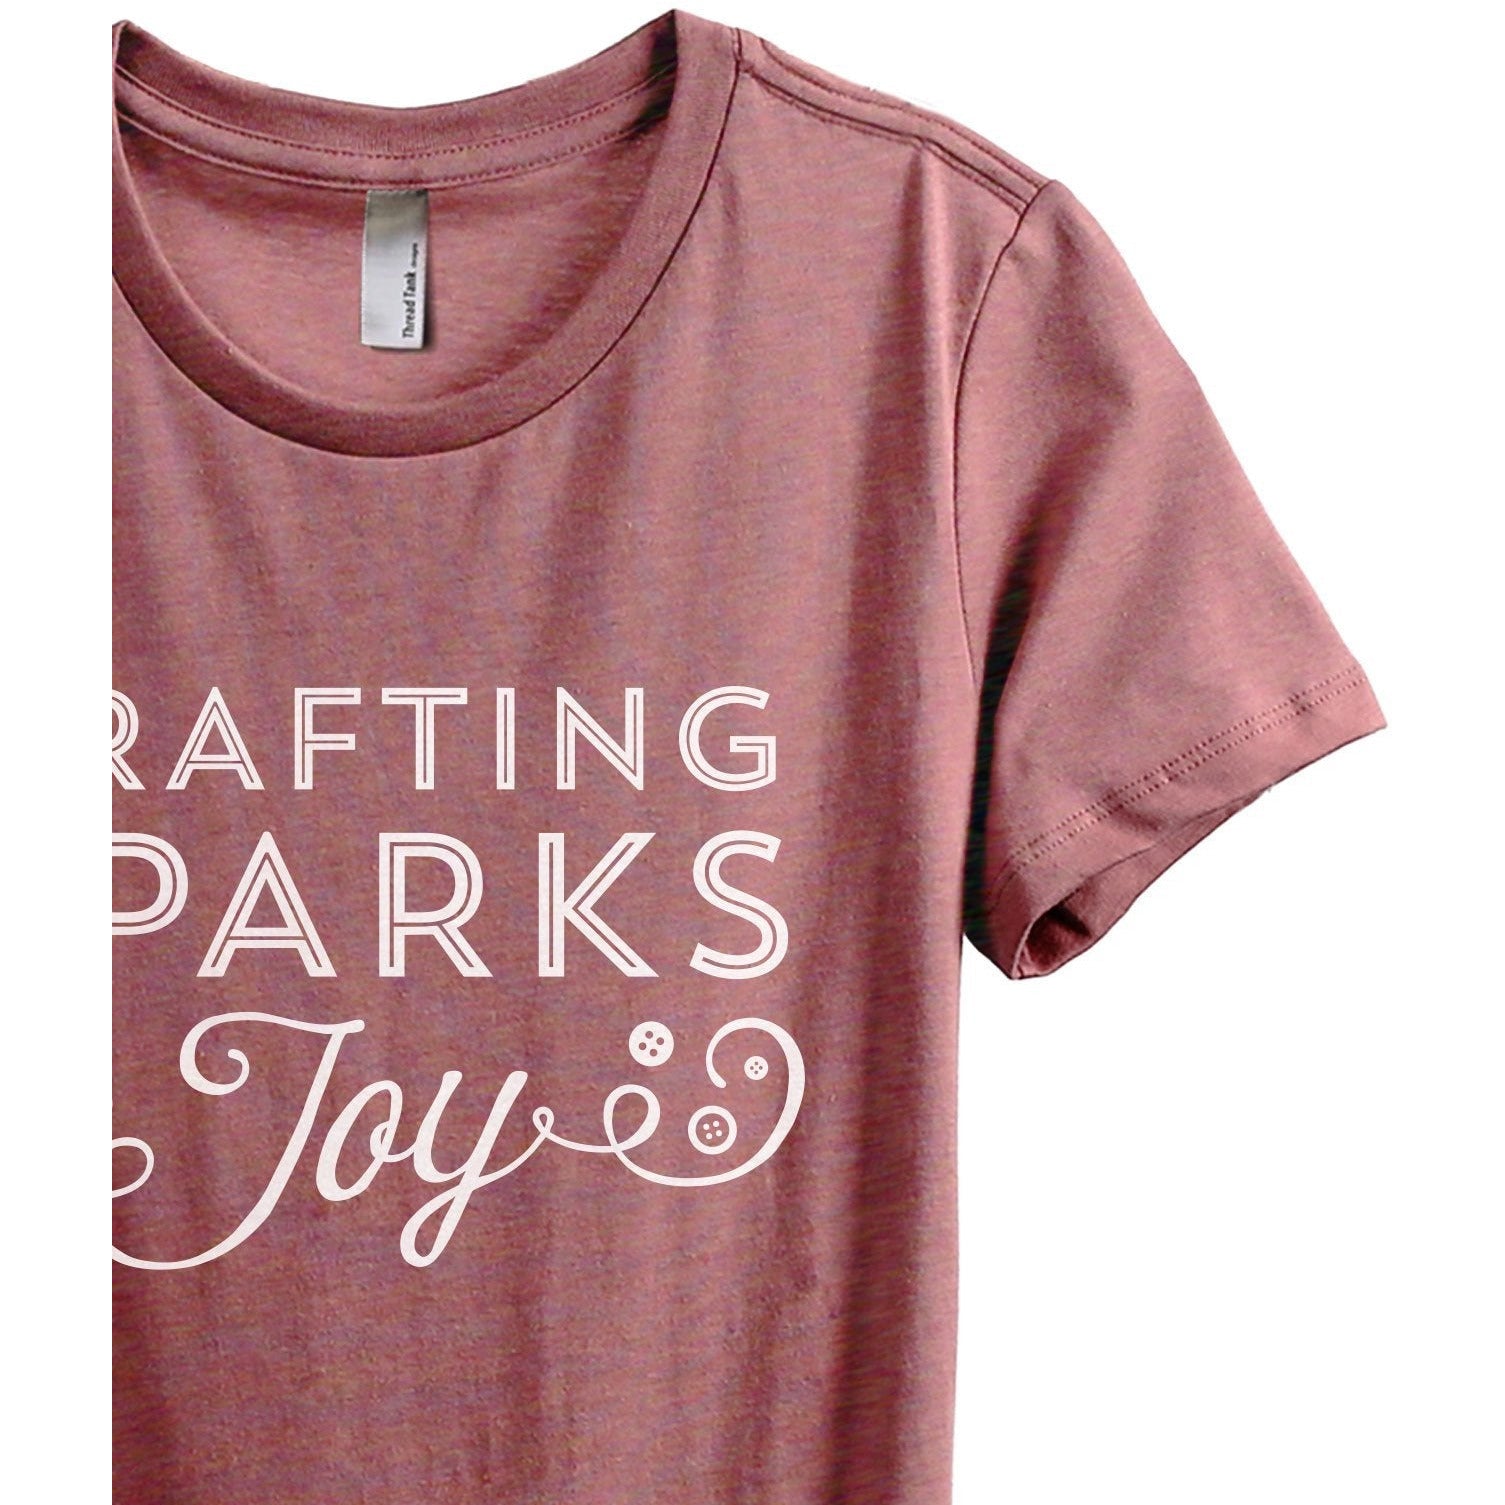 Crafting Sparks Joy Women's Relaxed Crewneck T-Shirt Top Tee Heather Rouge Zoom Details
